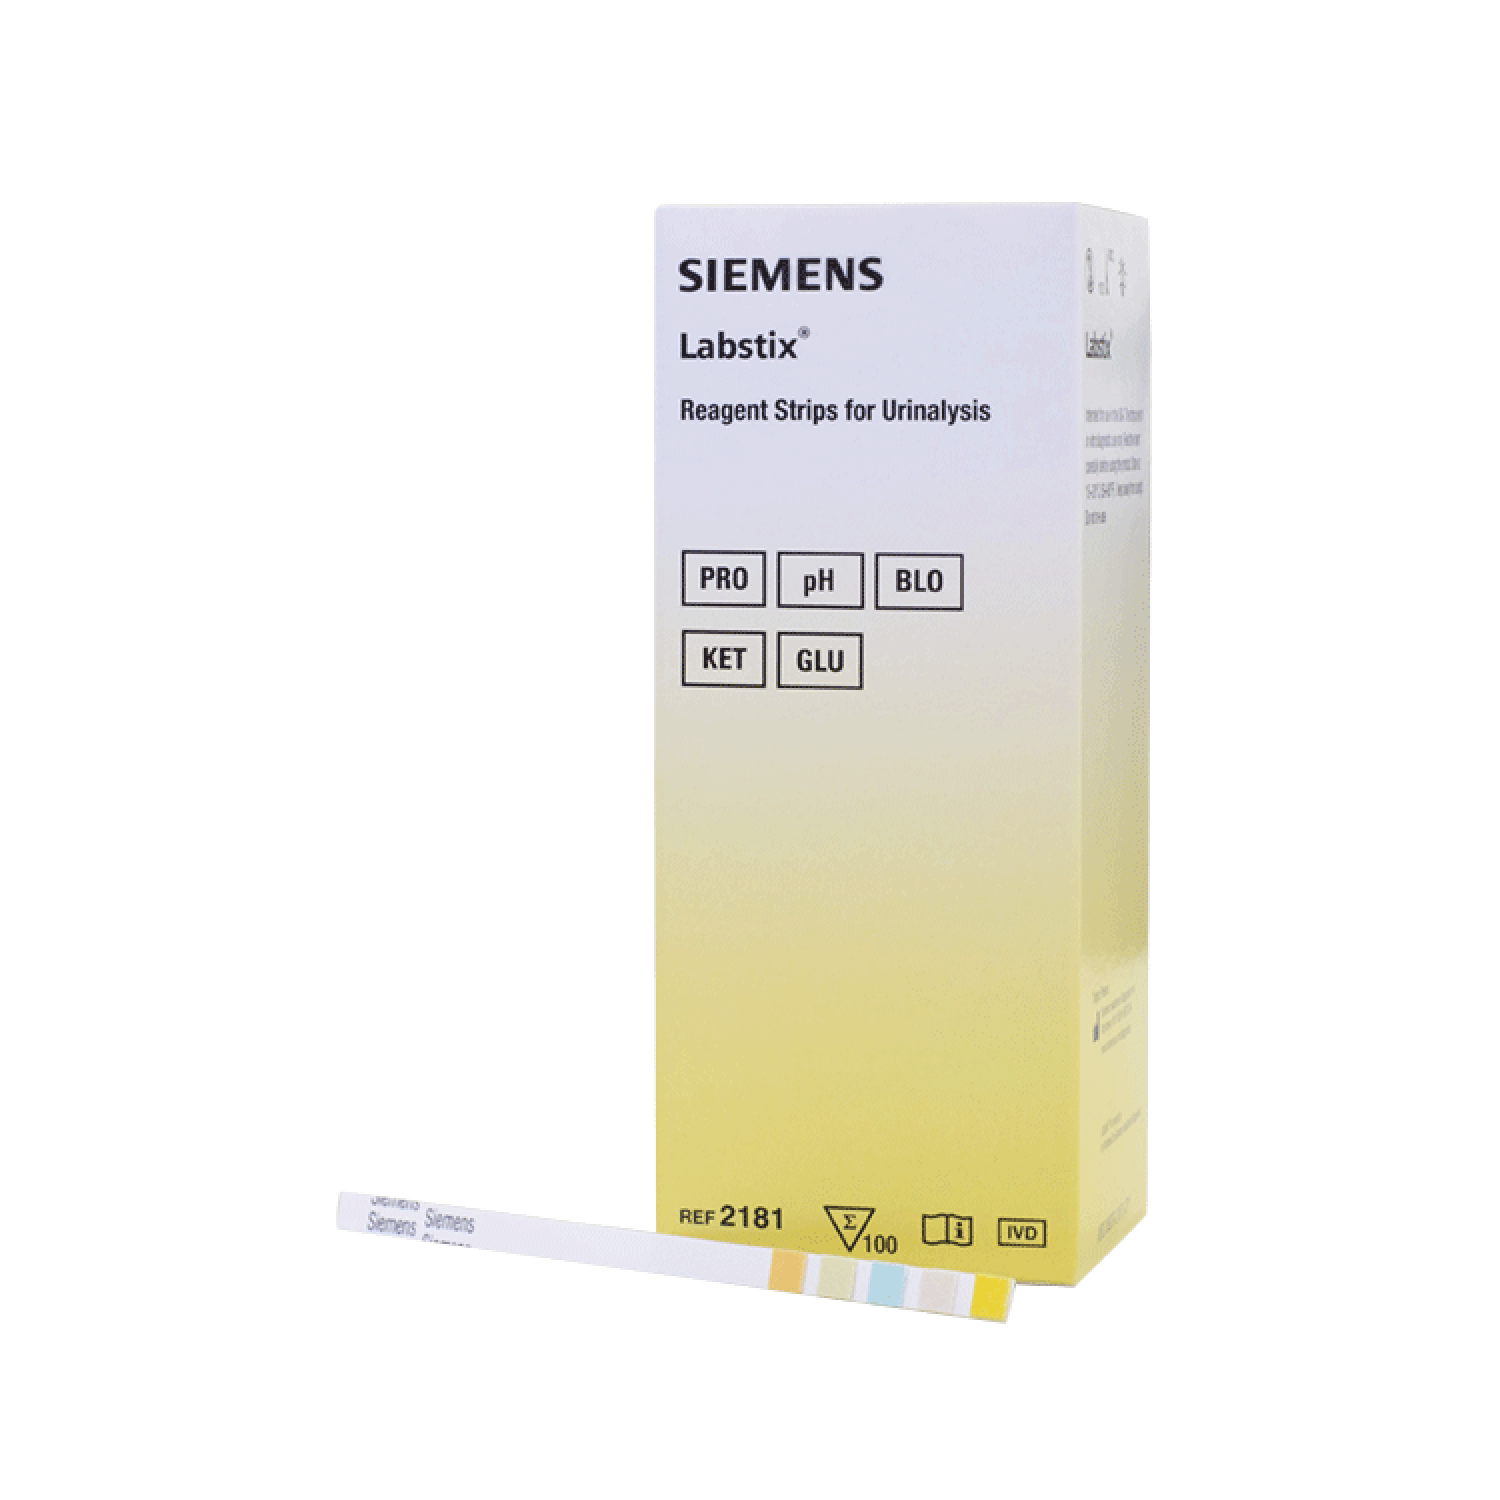 Siemens Labstix Reagent Strips for Urinalysis | Pack of 100